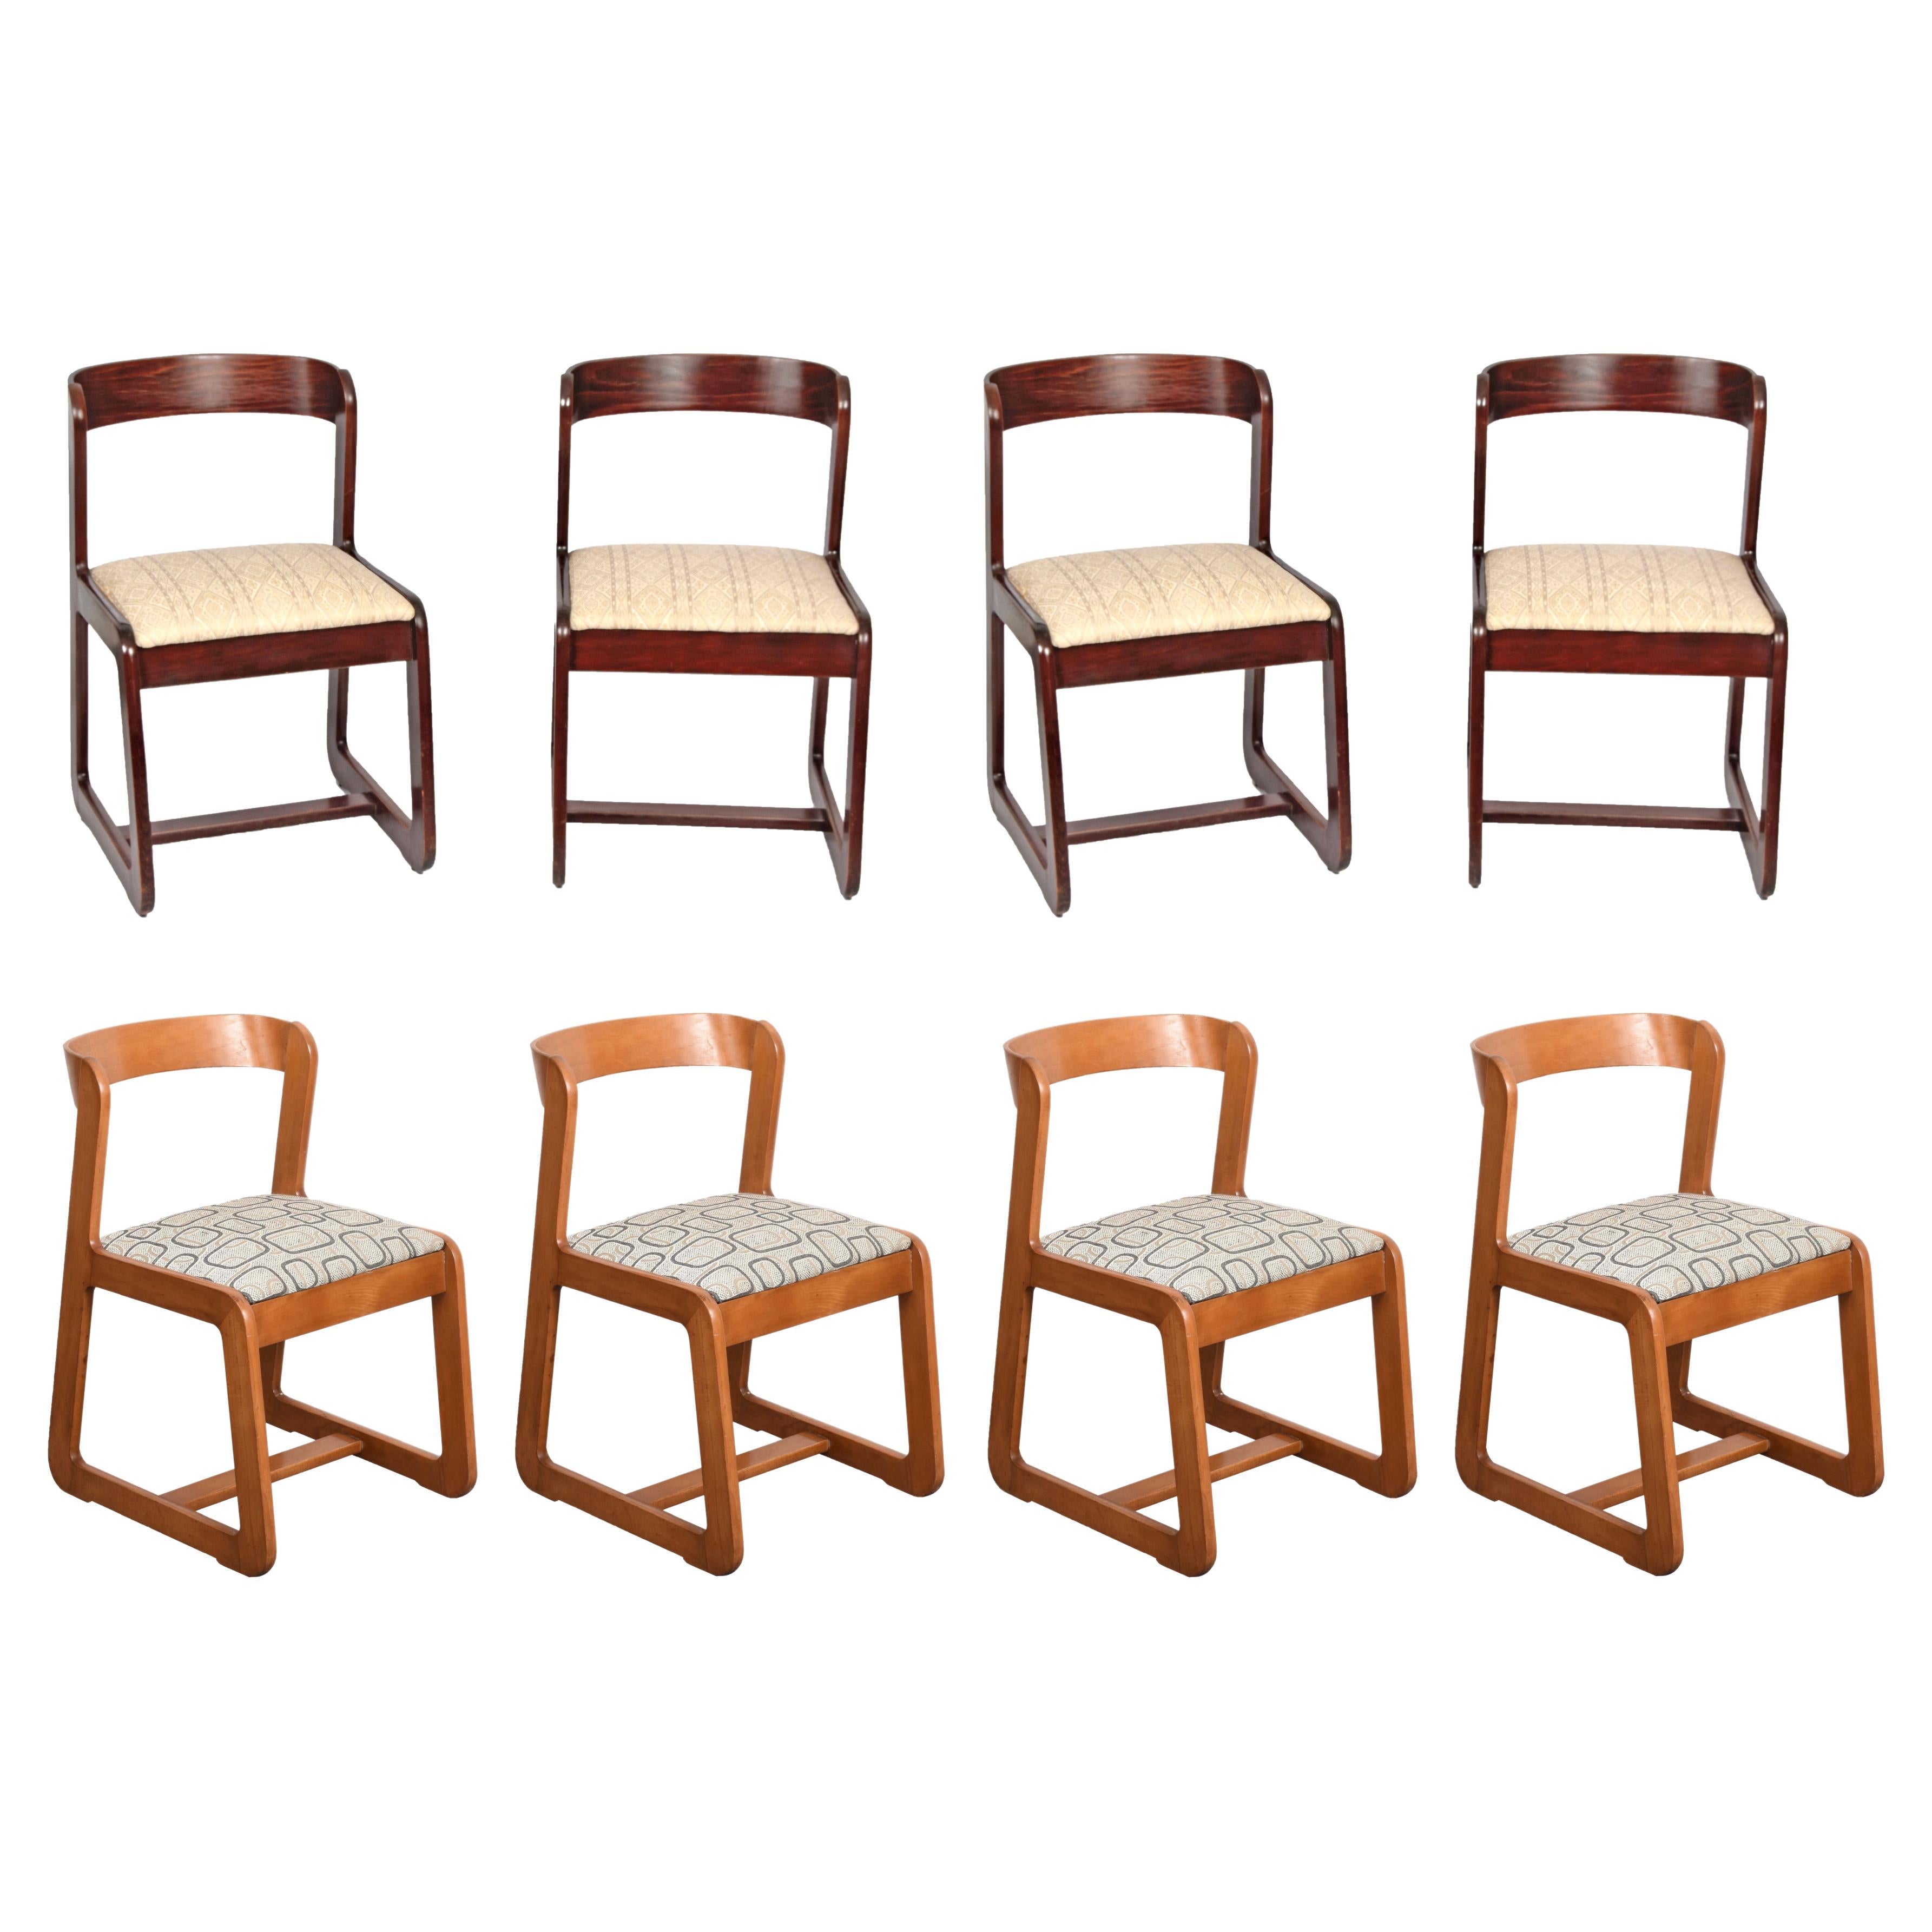 Two sets of four Willy Rizzo Wooden and Fabric Chairs for Mario Sabot, 1970